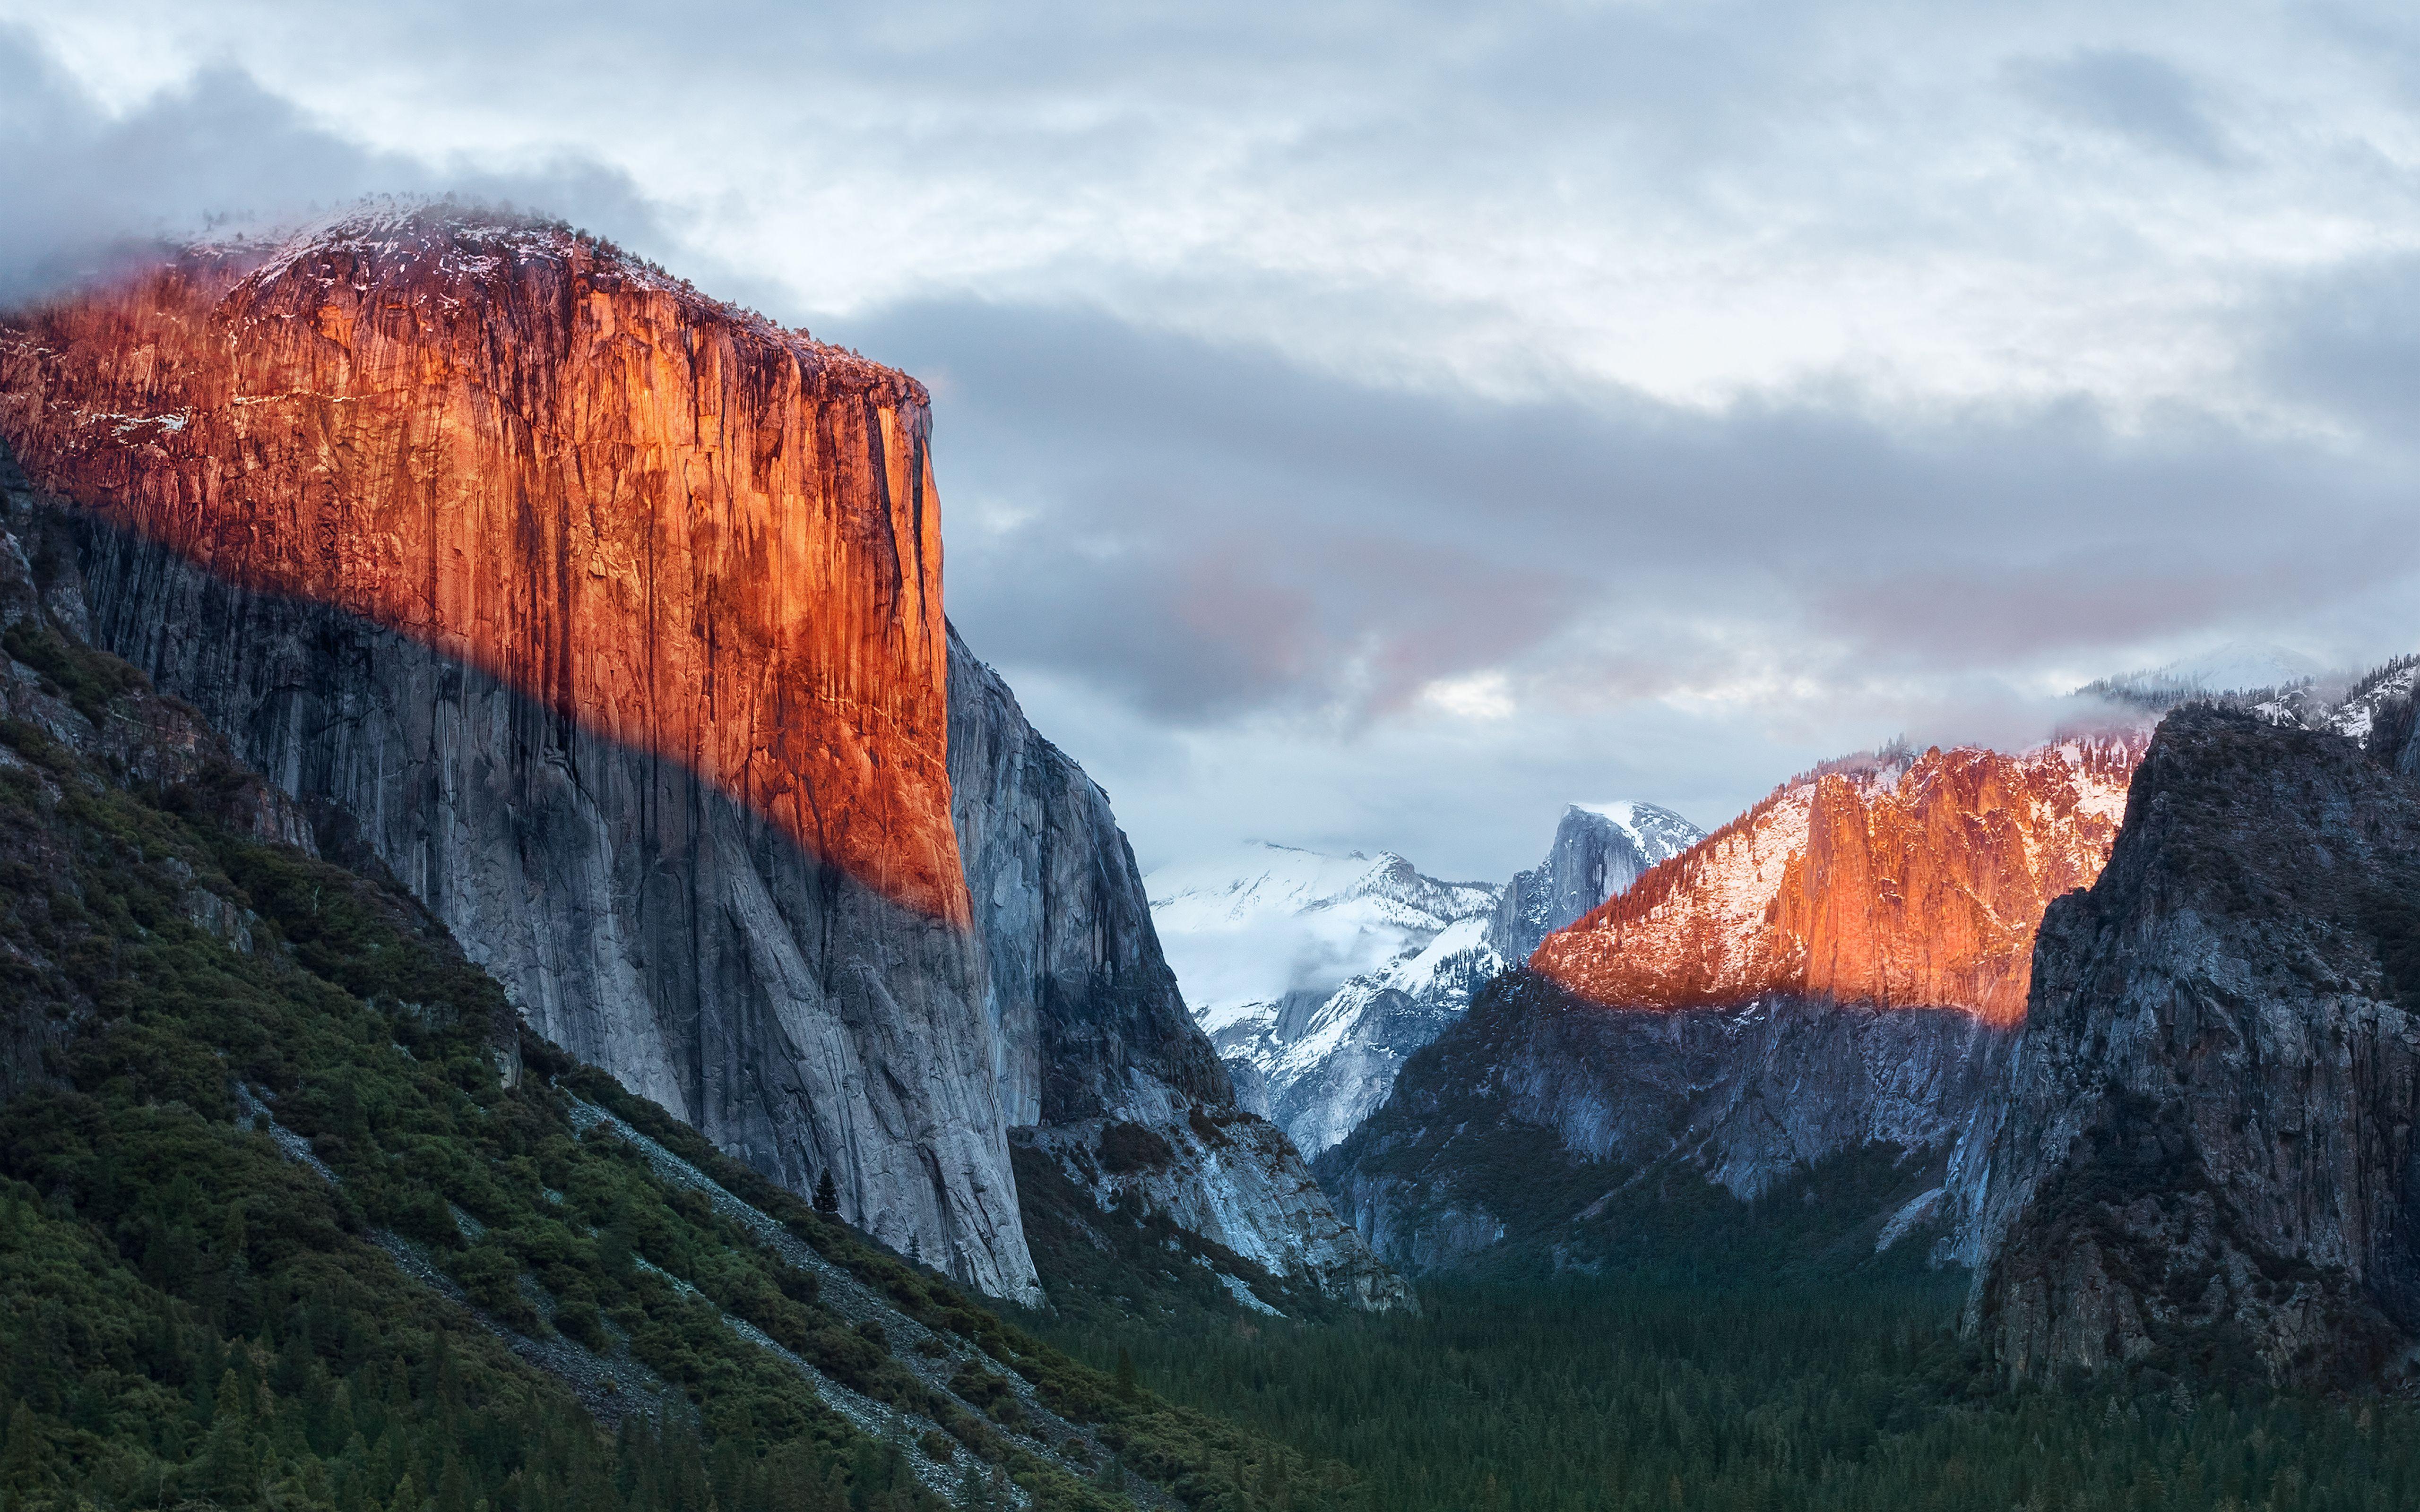 8-year-old becomes youngest ever to climb El Capitan